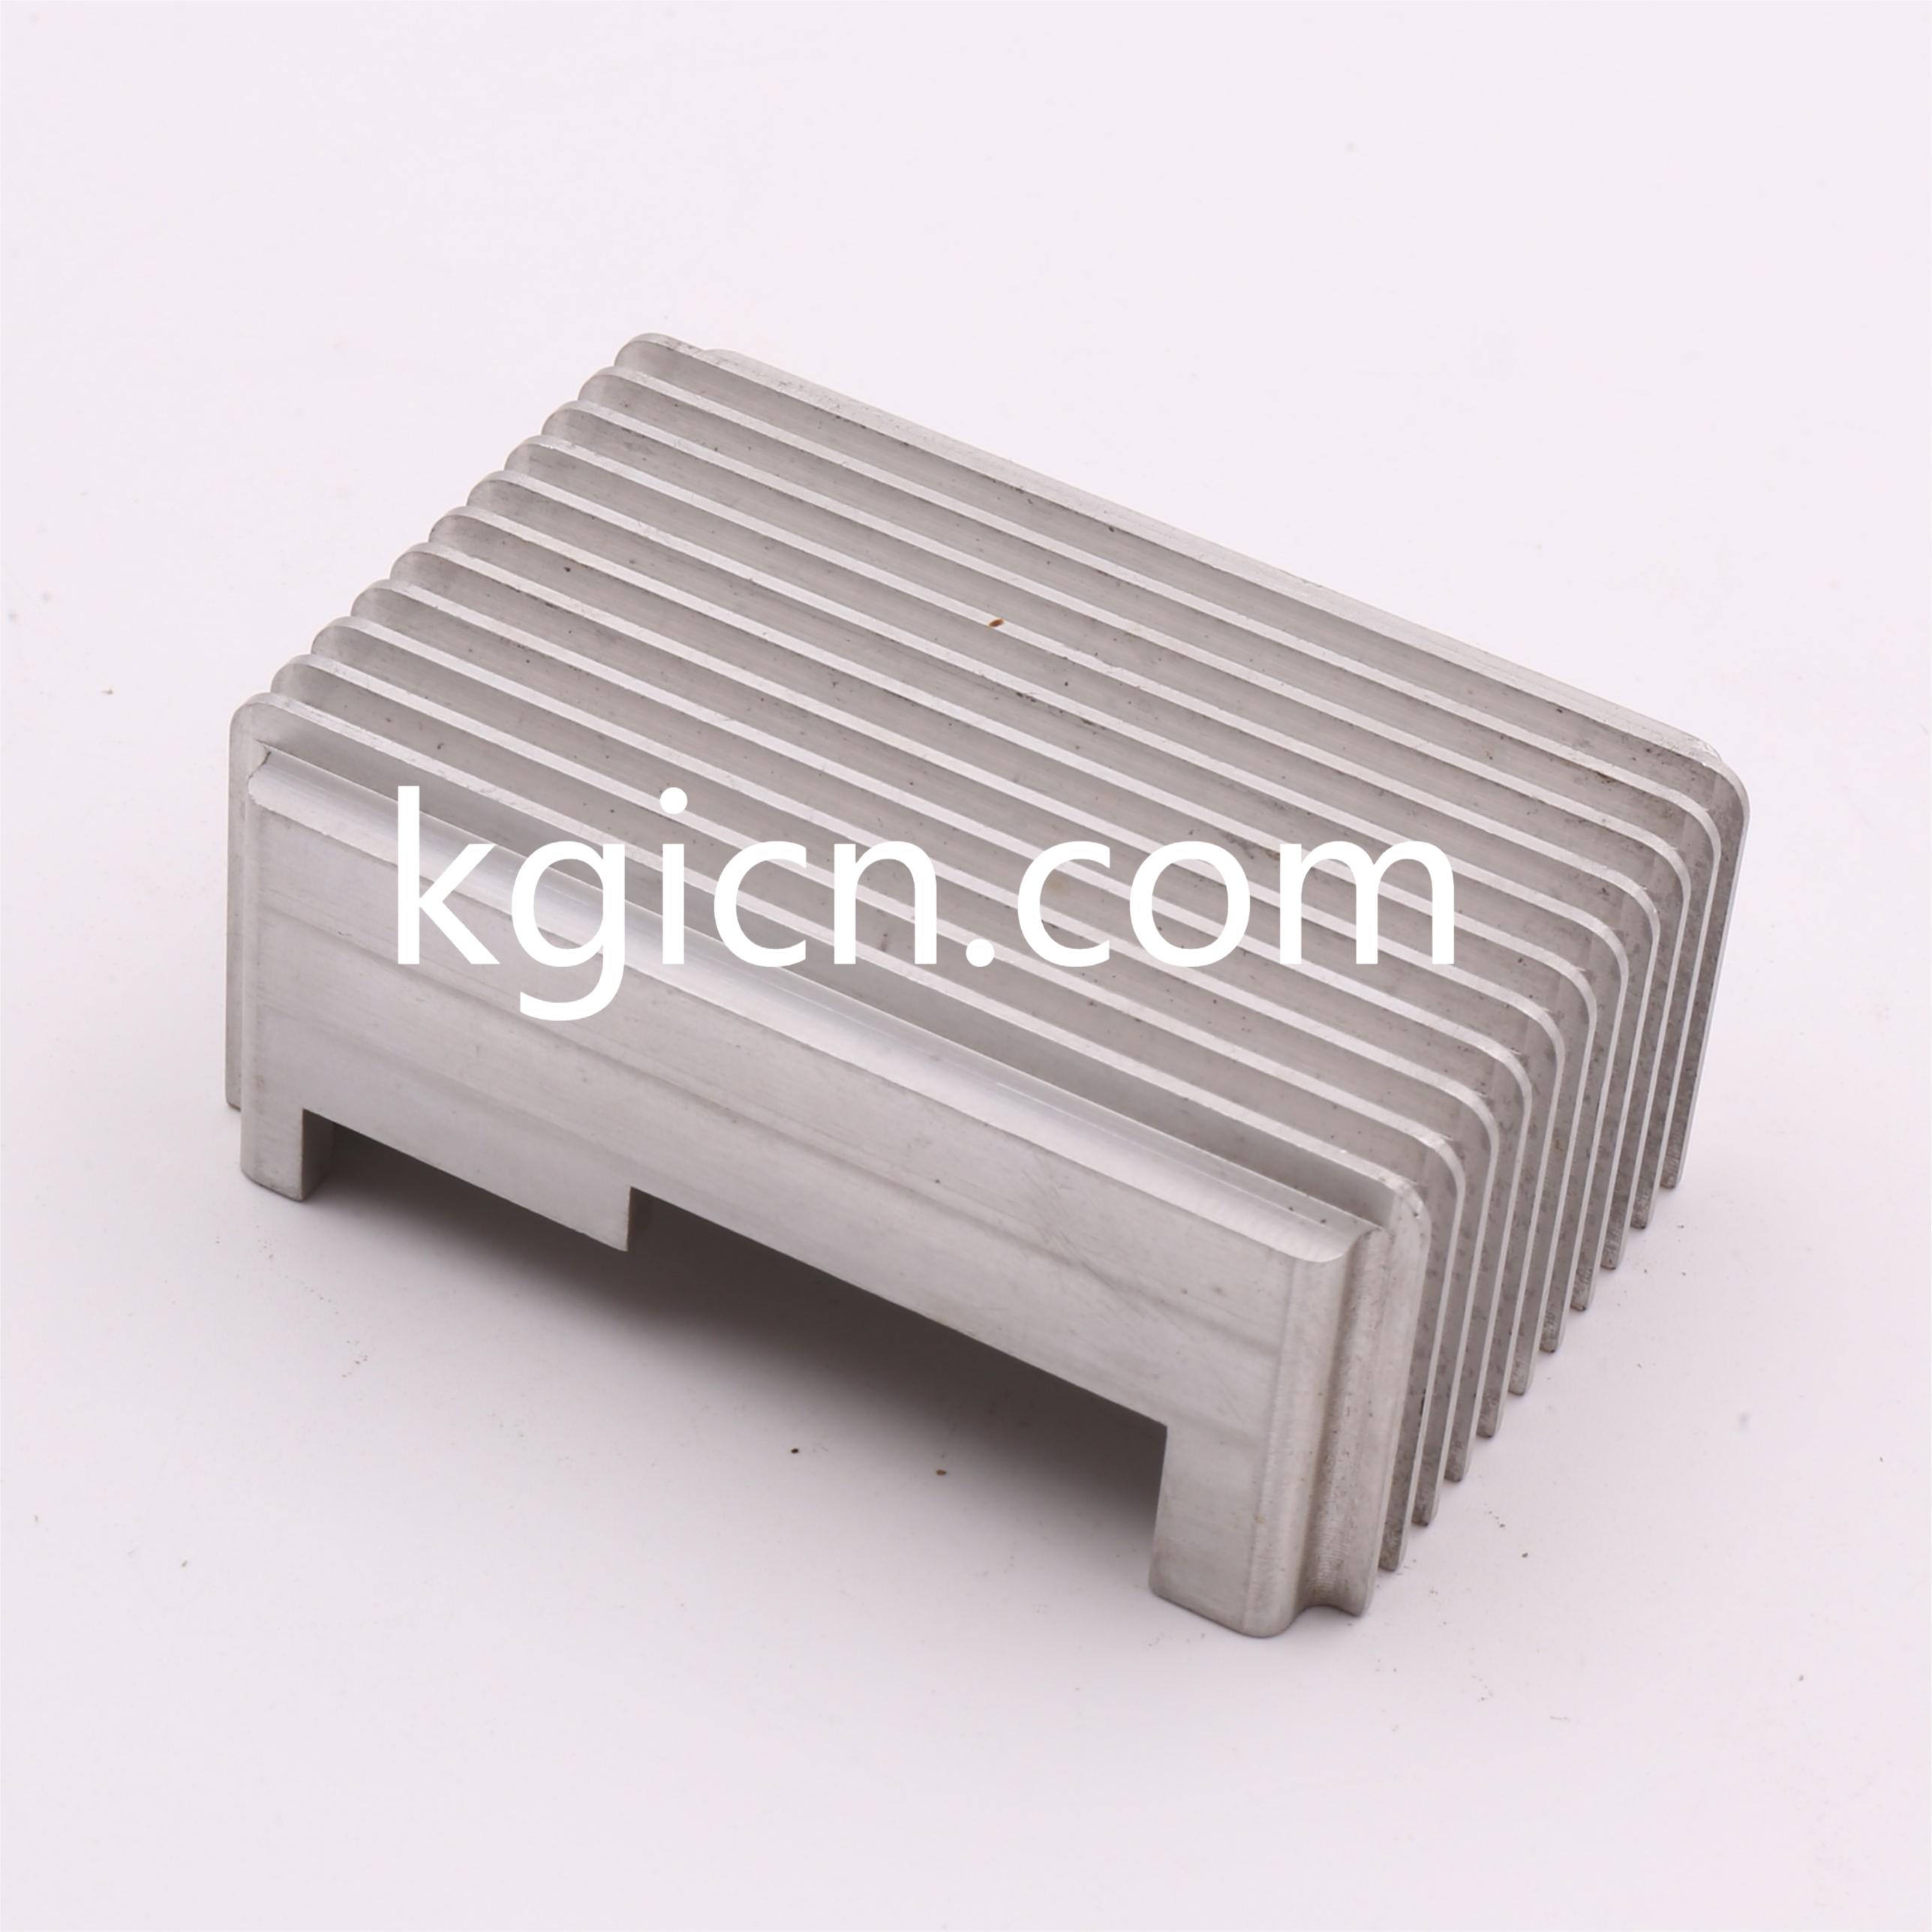 High quality OEM Clip Water Cooled Copper Heat Sink